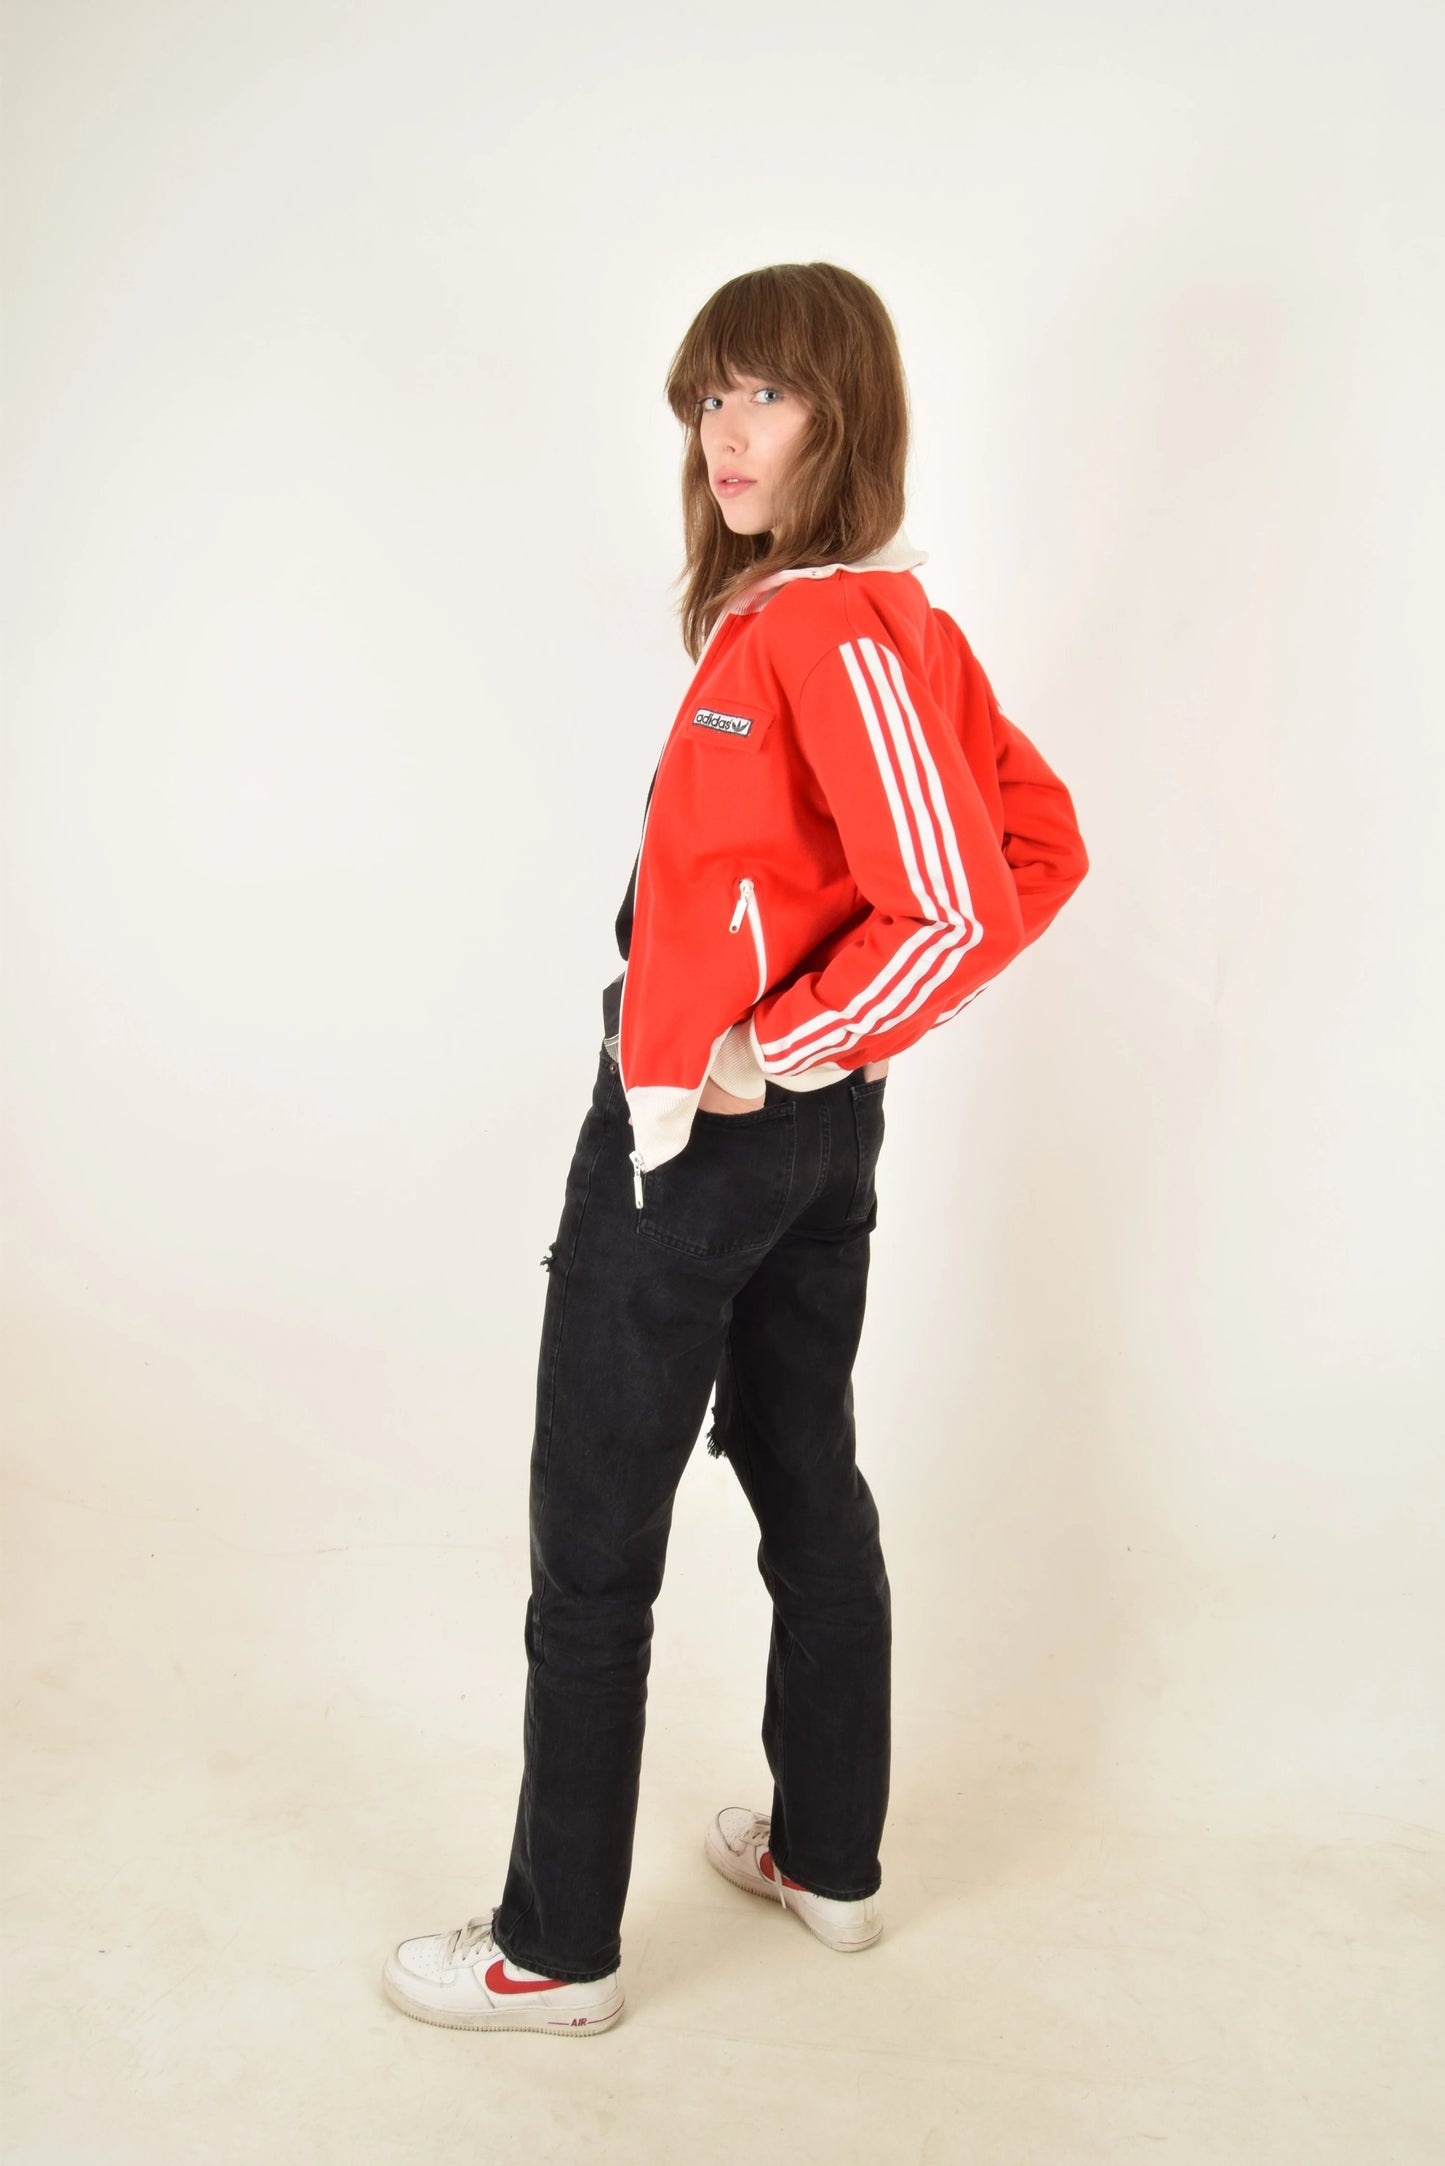 Vintage 70's Adidas Track top / Jacket Red Made in Yugoslavia